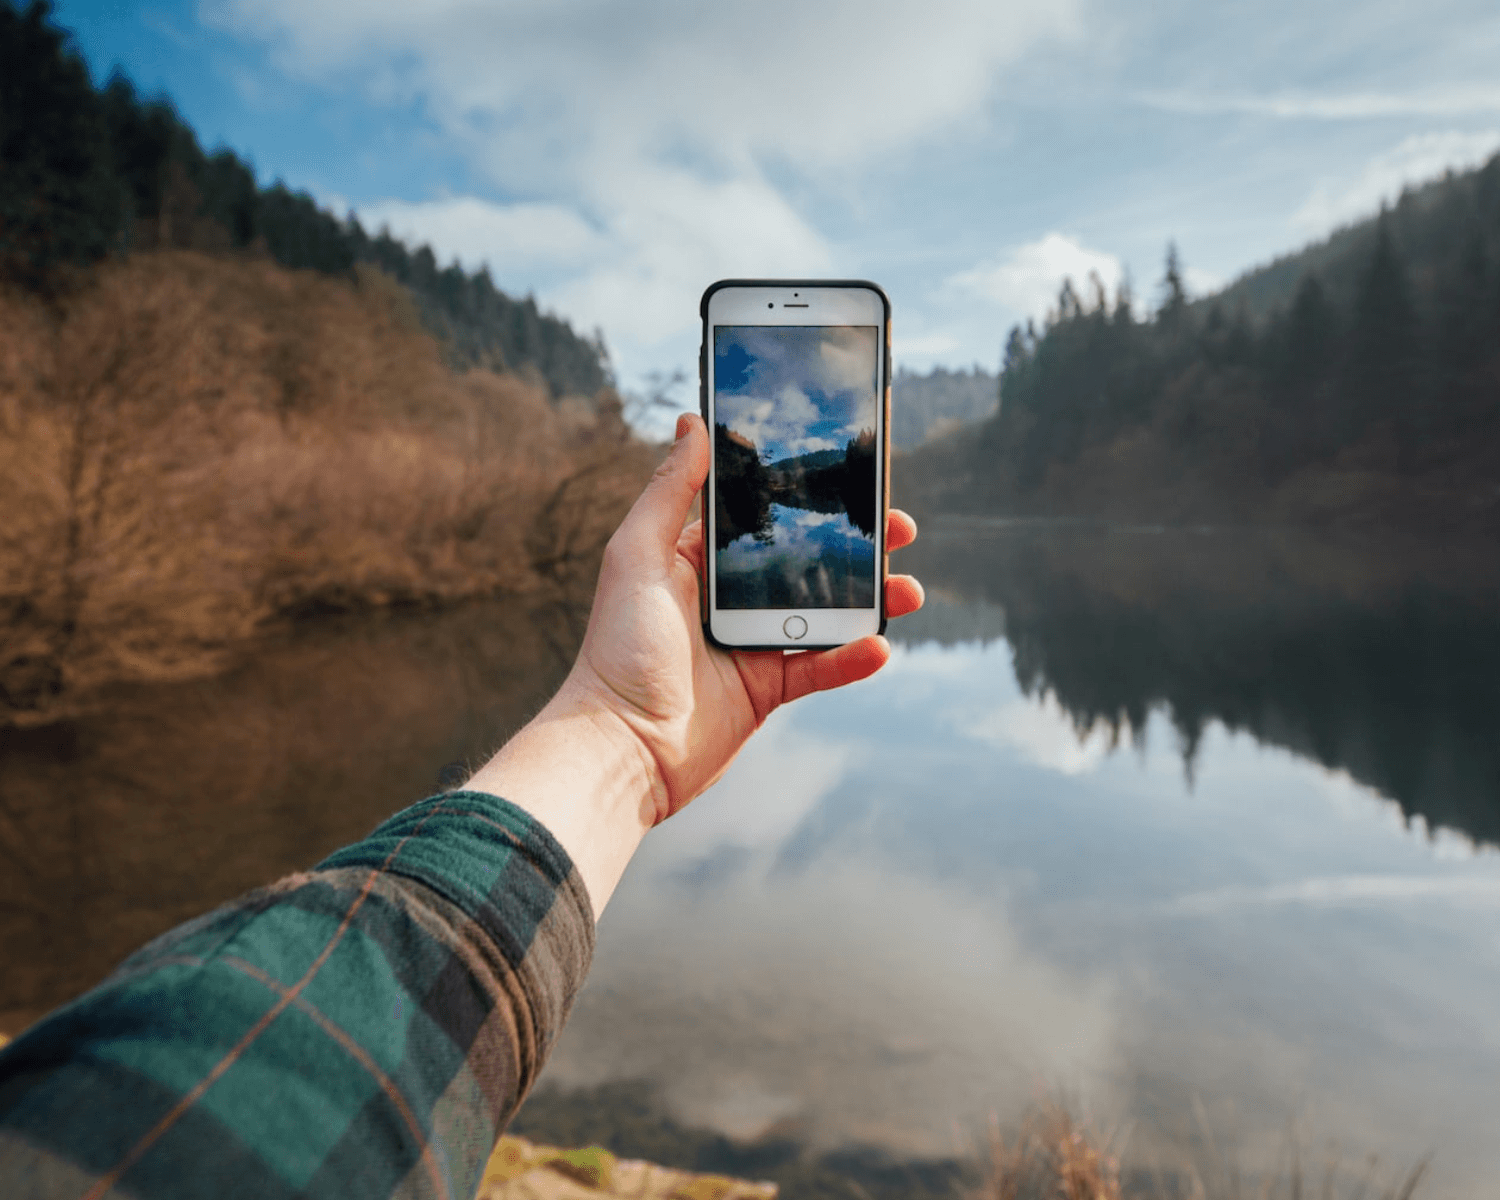 6 Interesting Pros and Cons of Smartphones vs Cameras